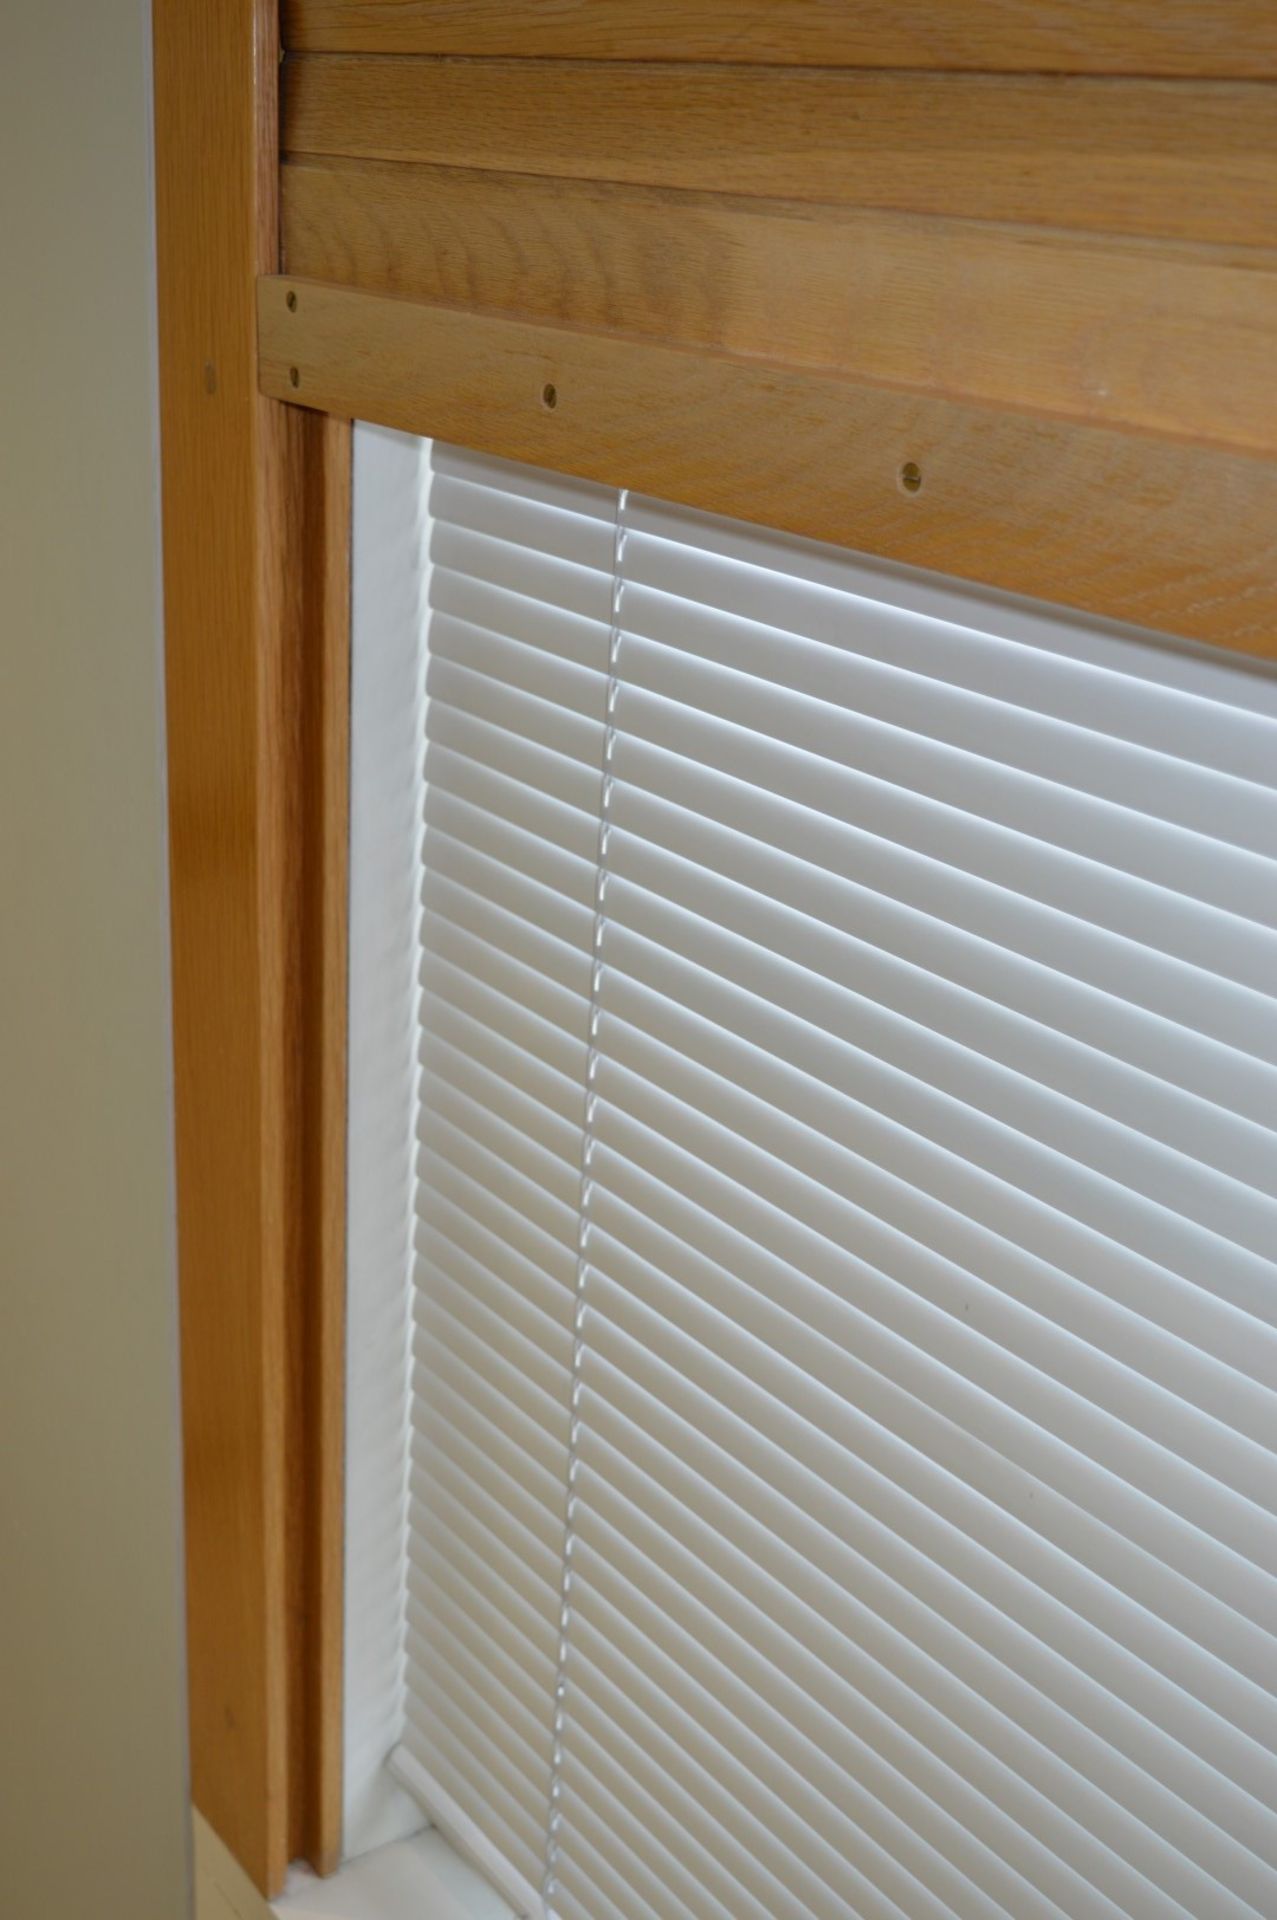 1 x Roller Shutter Window Shade With Electric Motor - Ref 58 - Solid Wooden Slat Design - CL230 - - Image 5 of 10